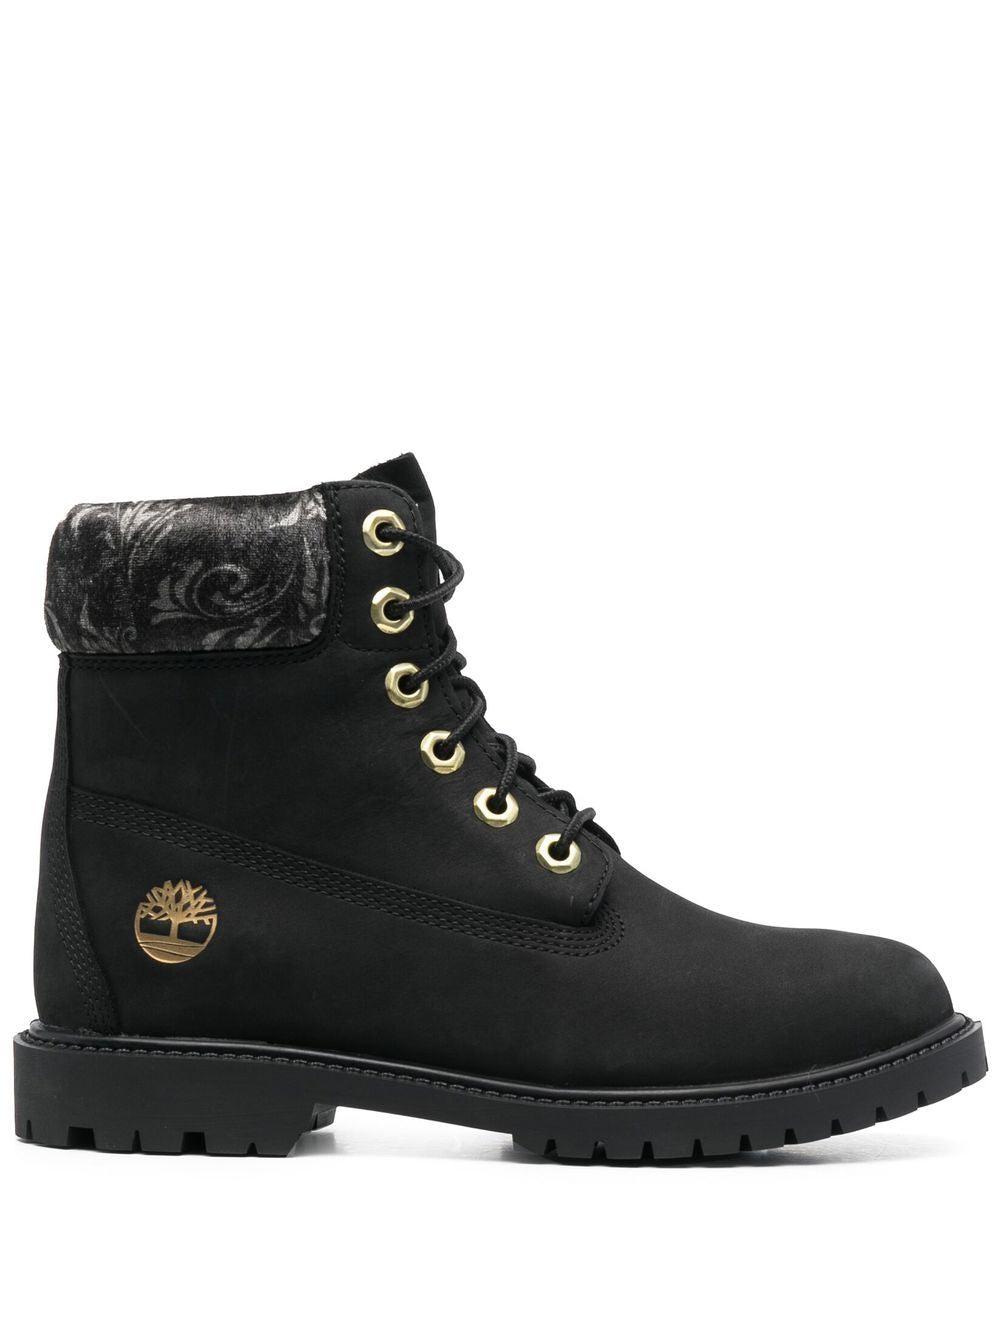 Timberland Heritage 6 Patterned-panel Boots in Black | Lyst